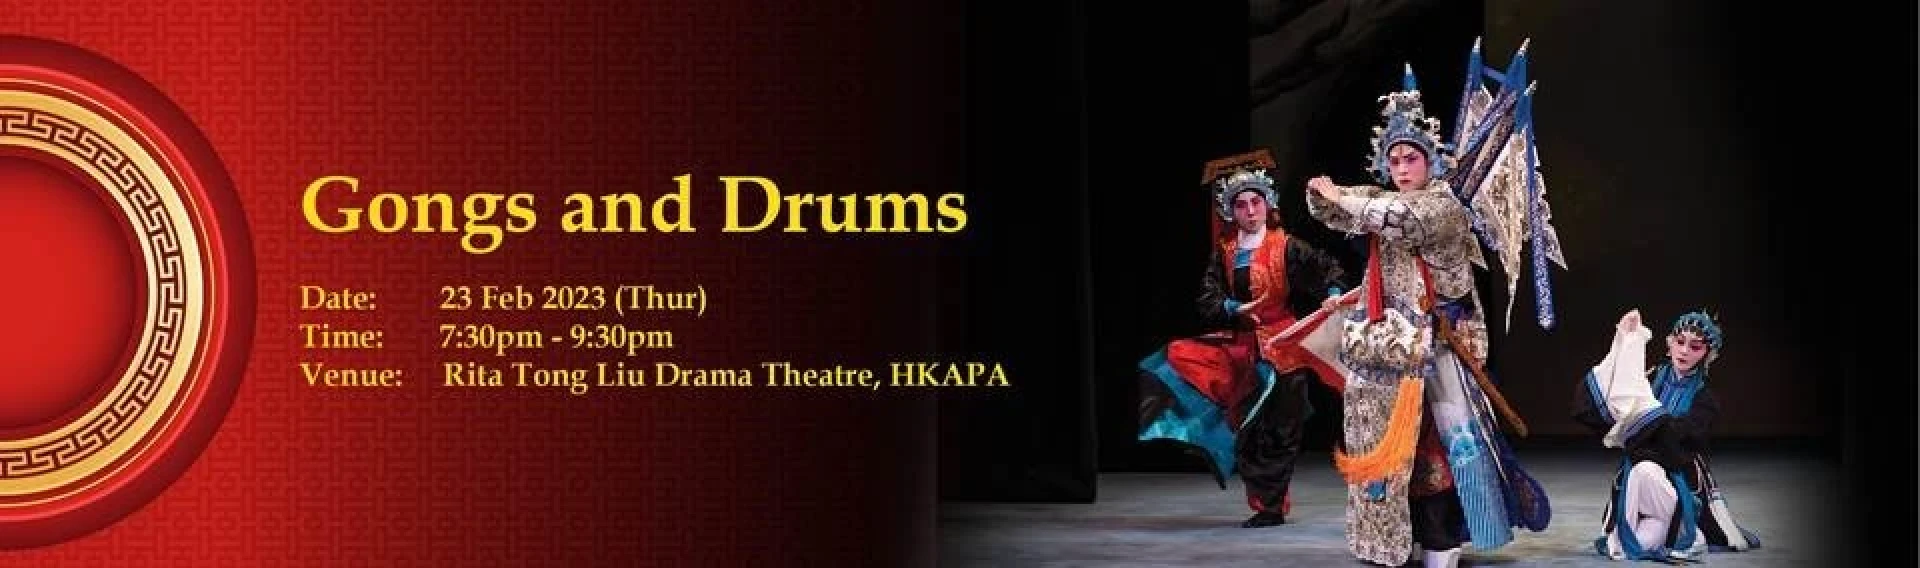 Grab the Chance to Enjoy Gongs and Drums